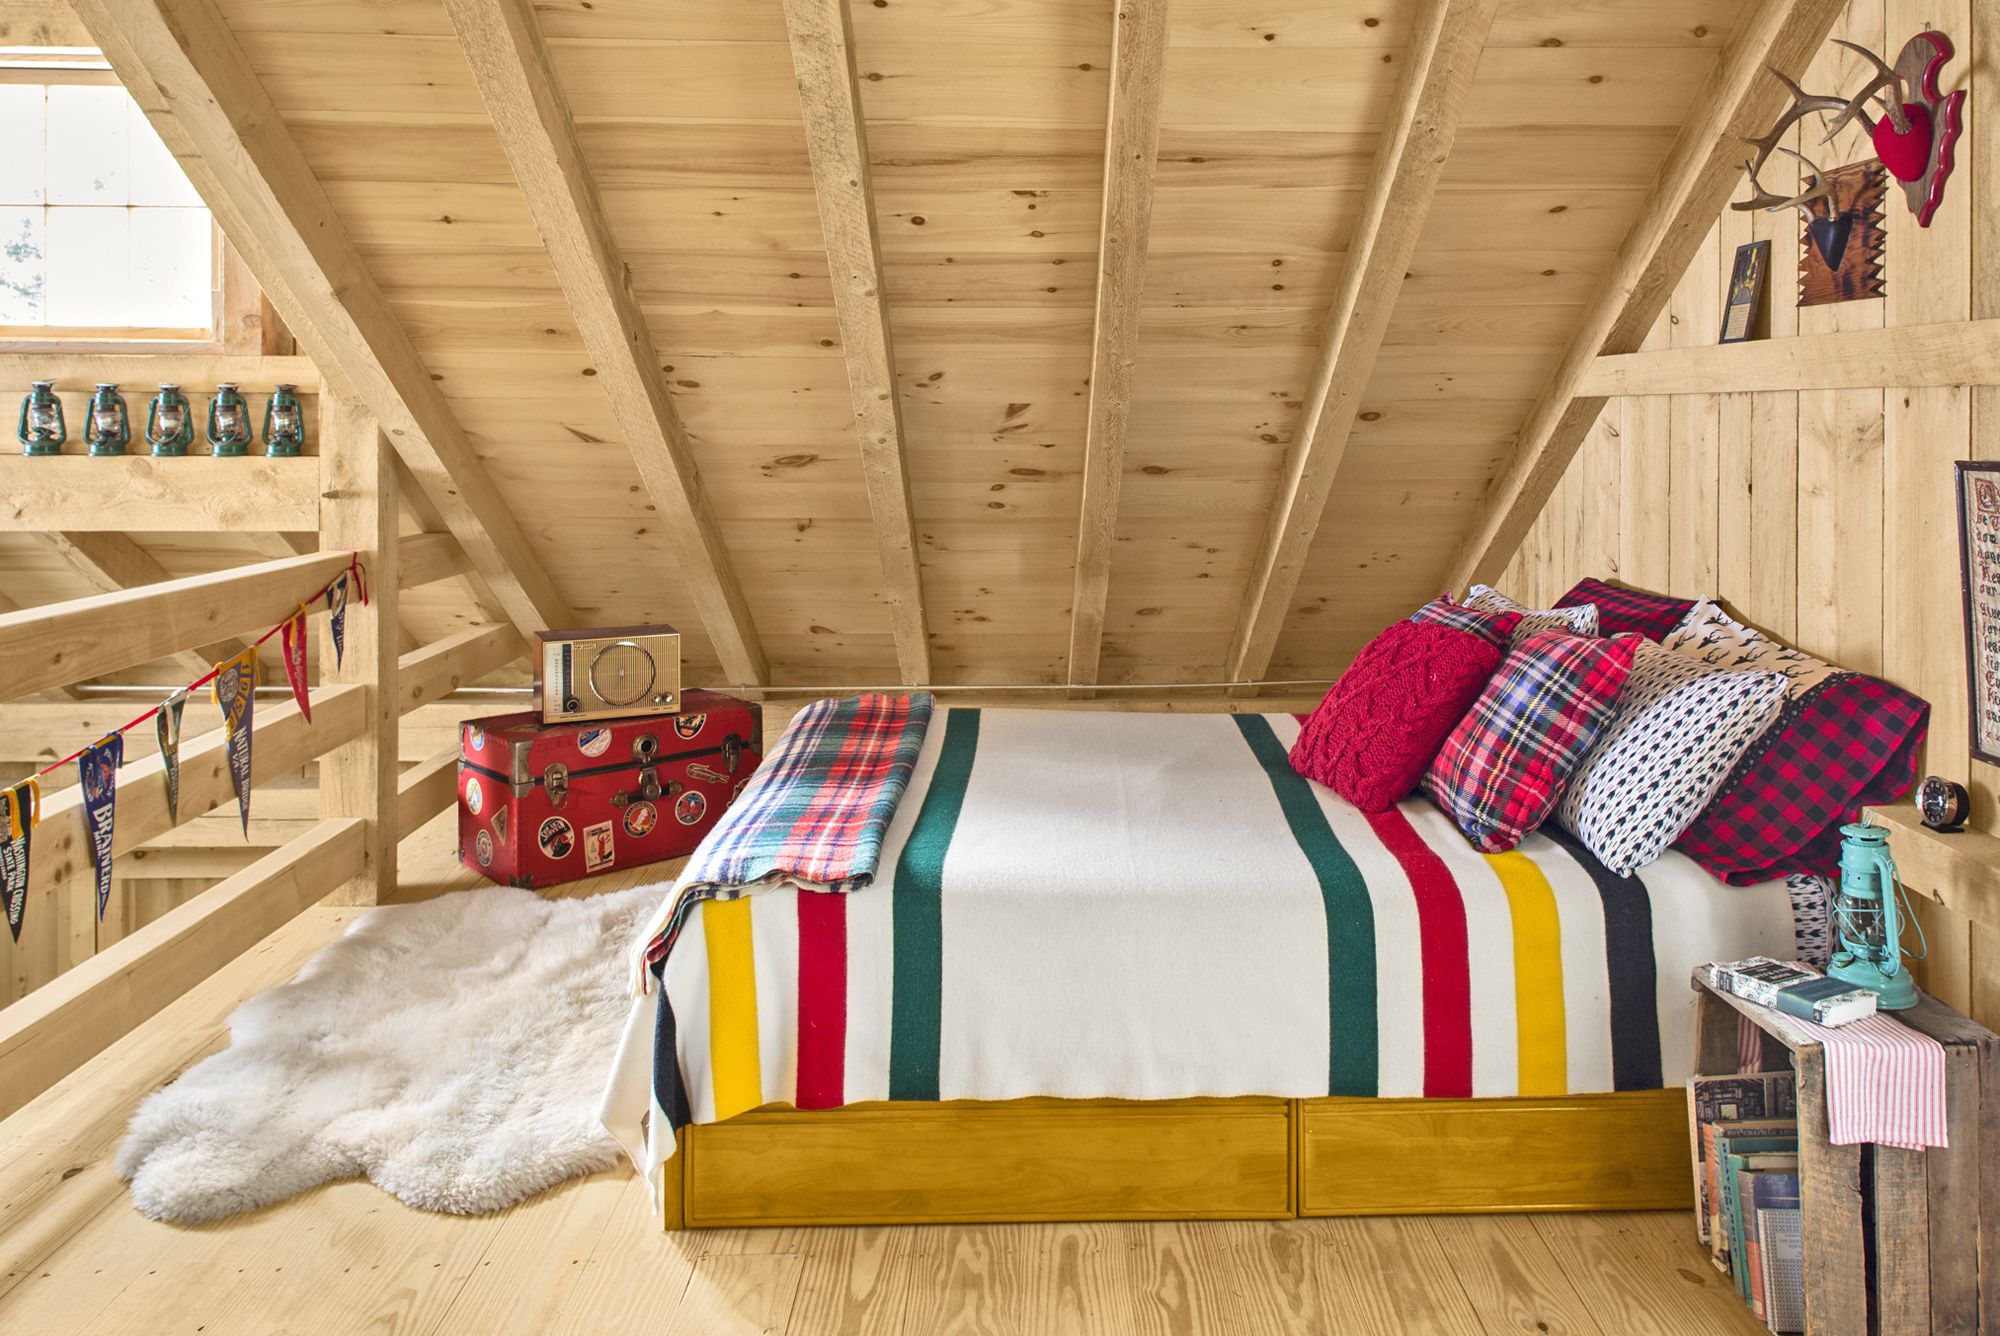 https://hips.hearstapps.com/countryliving/assets/17/35/party-barn-striped-bed-1017.jpg